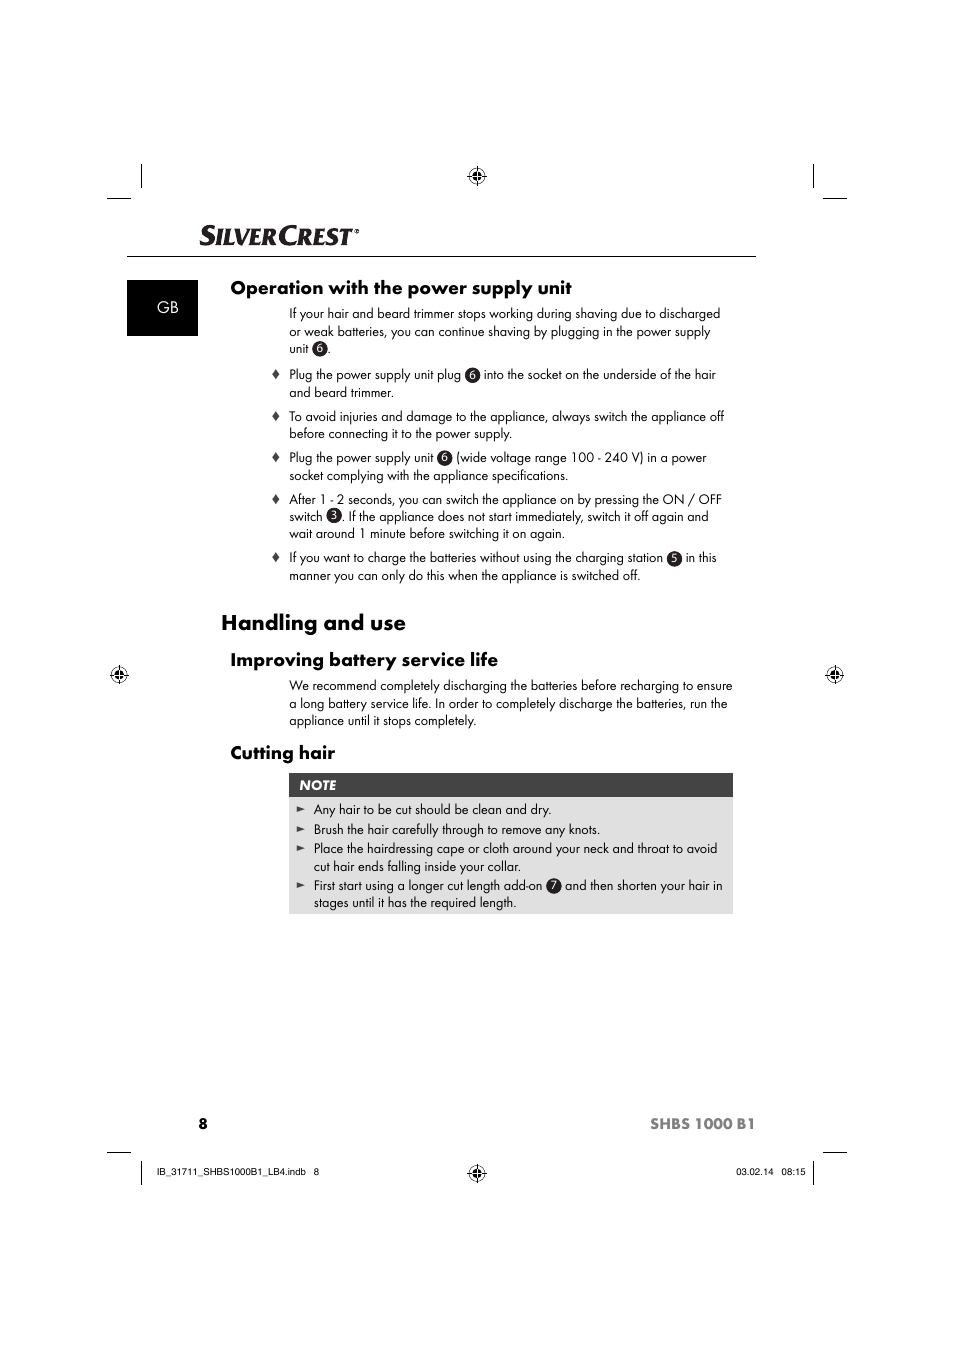 Handling and use, Operation with the power supply unit, Improving battery  service life | Silvercrest SHBS 1000 A1 User Manual | Page 11 / 102